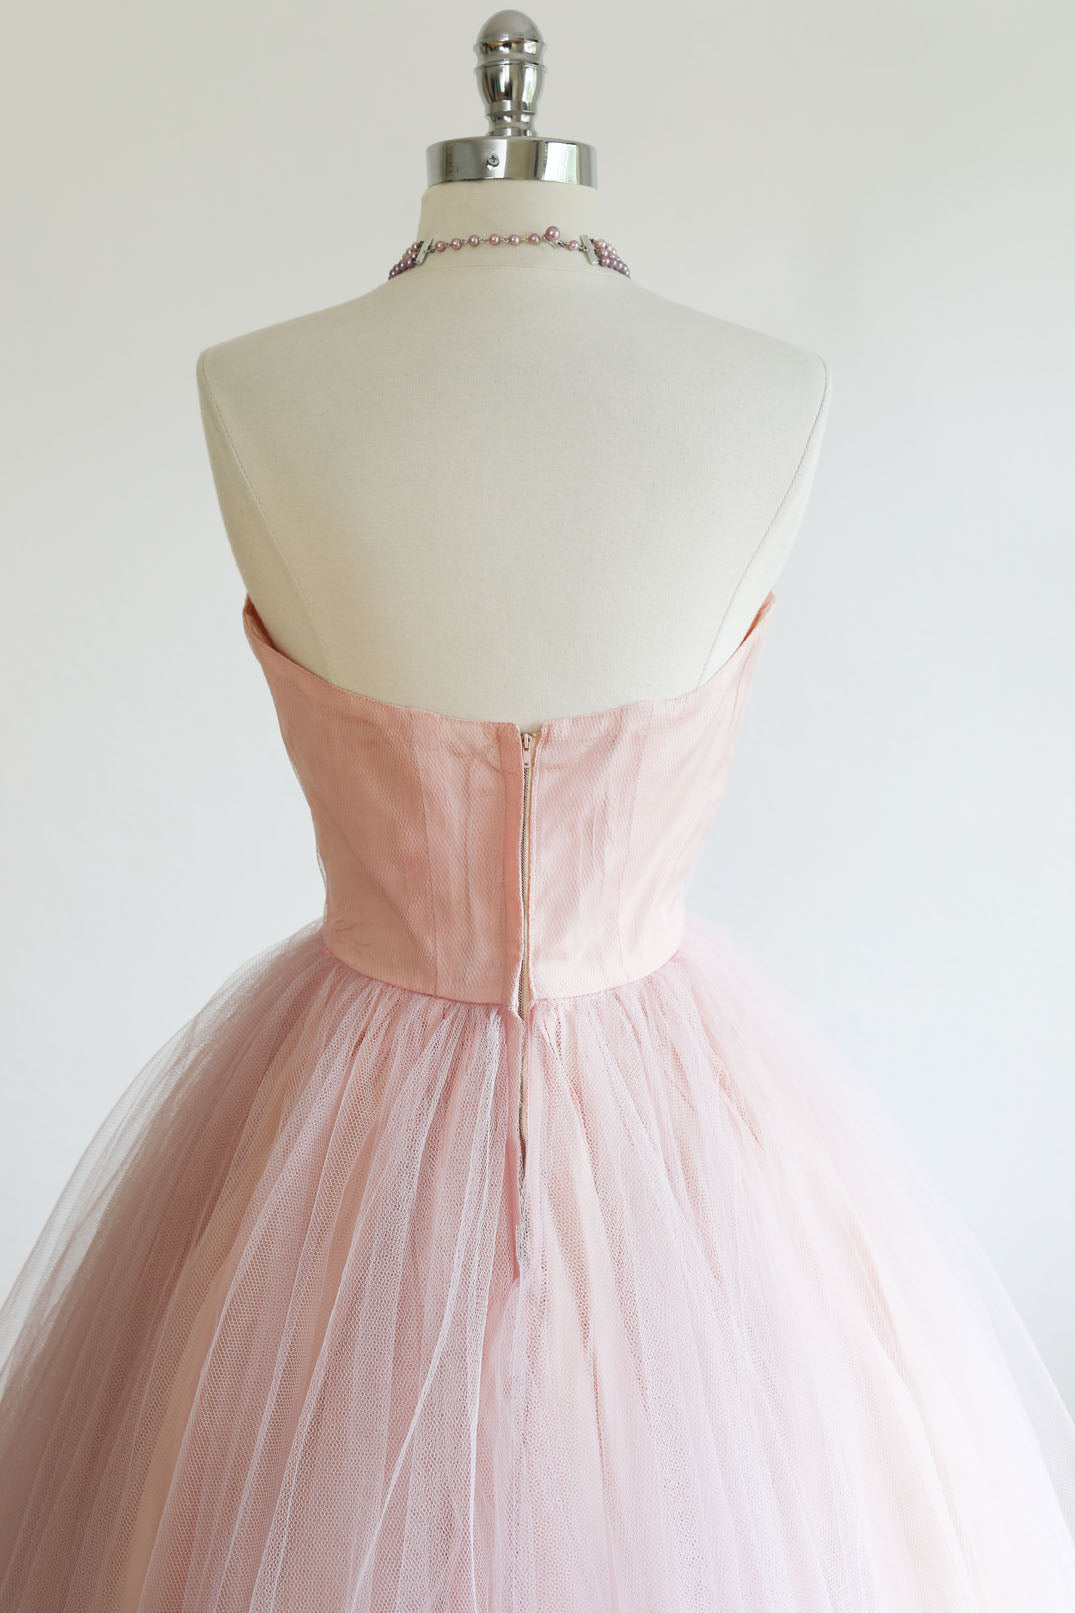 Vintage 1950s Dress - SWEET w an EDGE Pastel Pink Tulle Lace Strapless Gown w Fanged Bust Size S